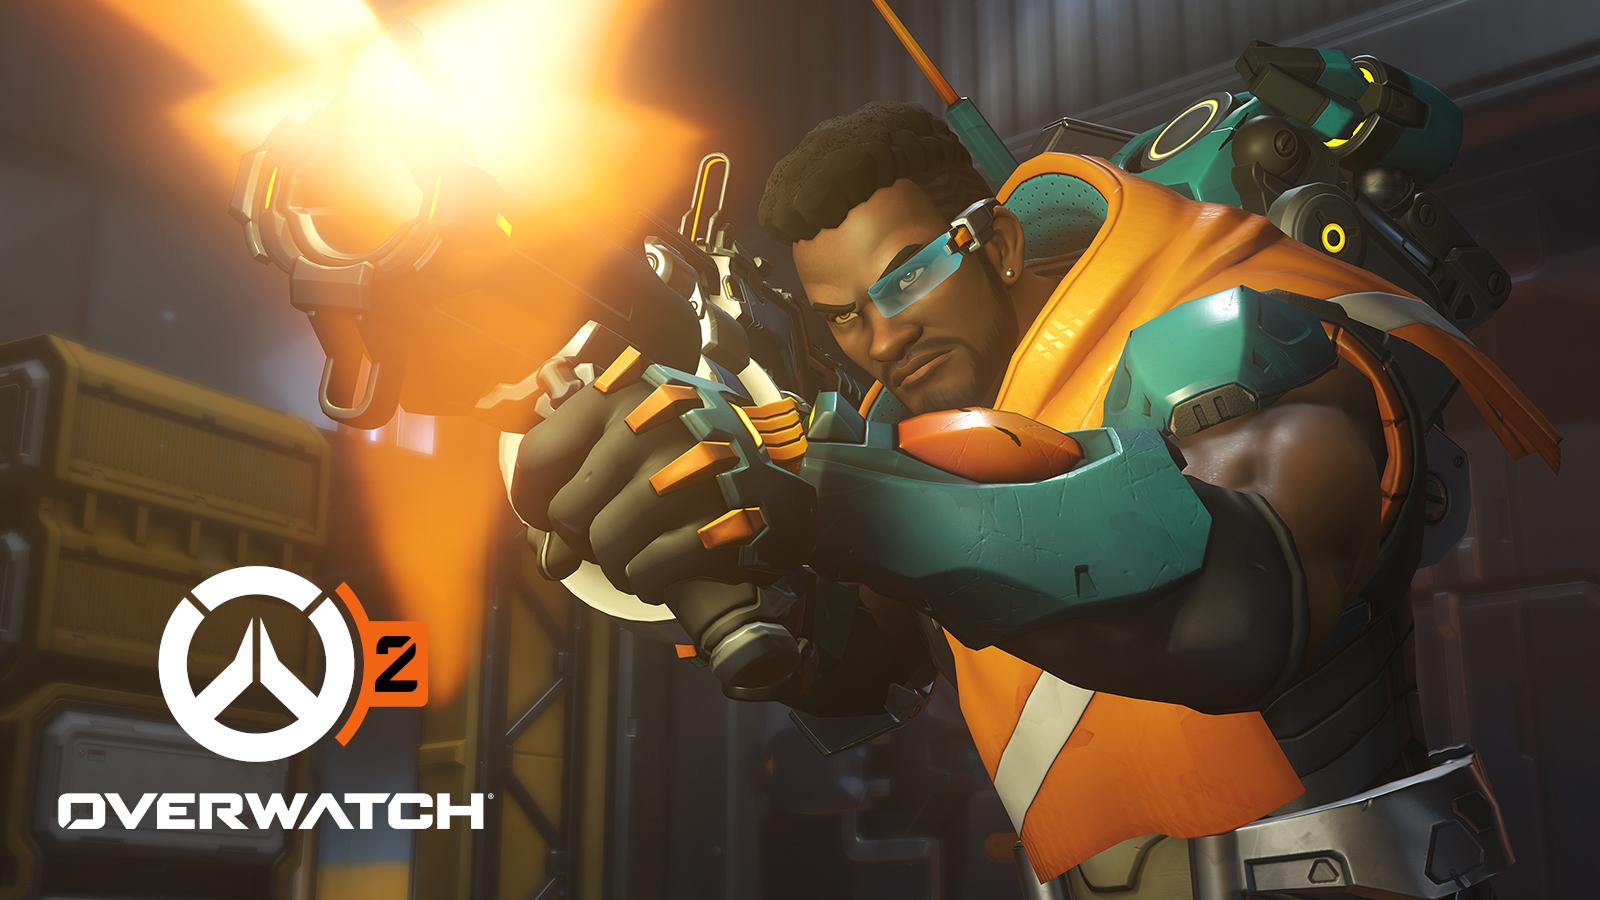 baptiste shooting in ow2